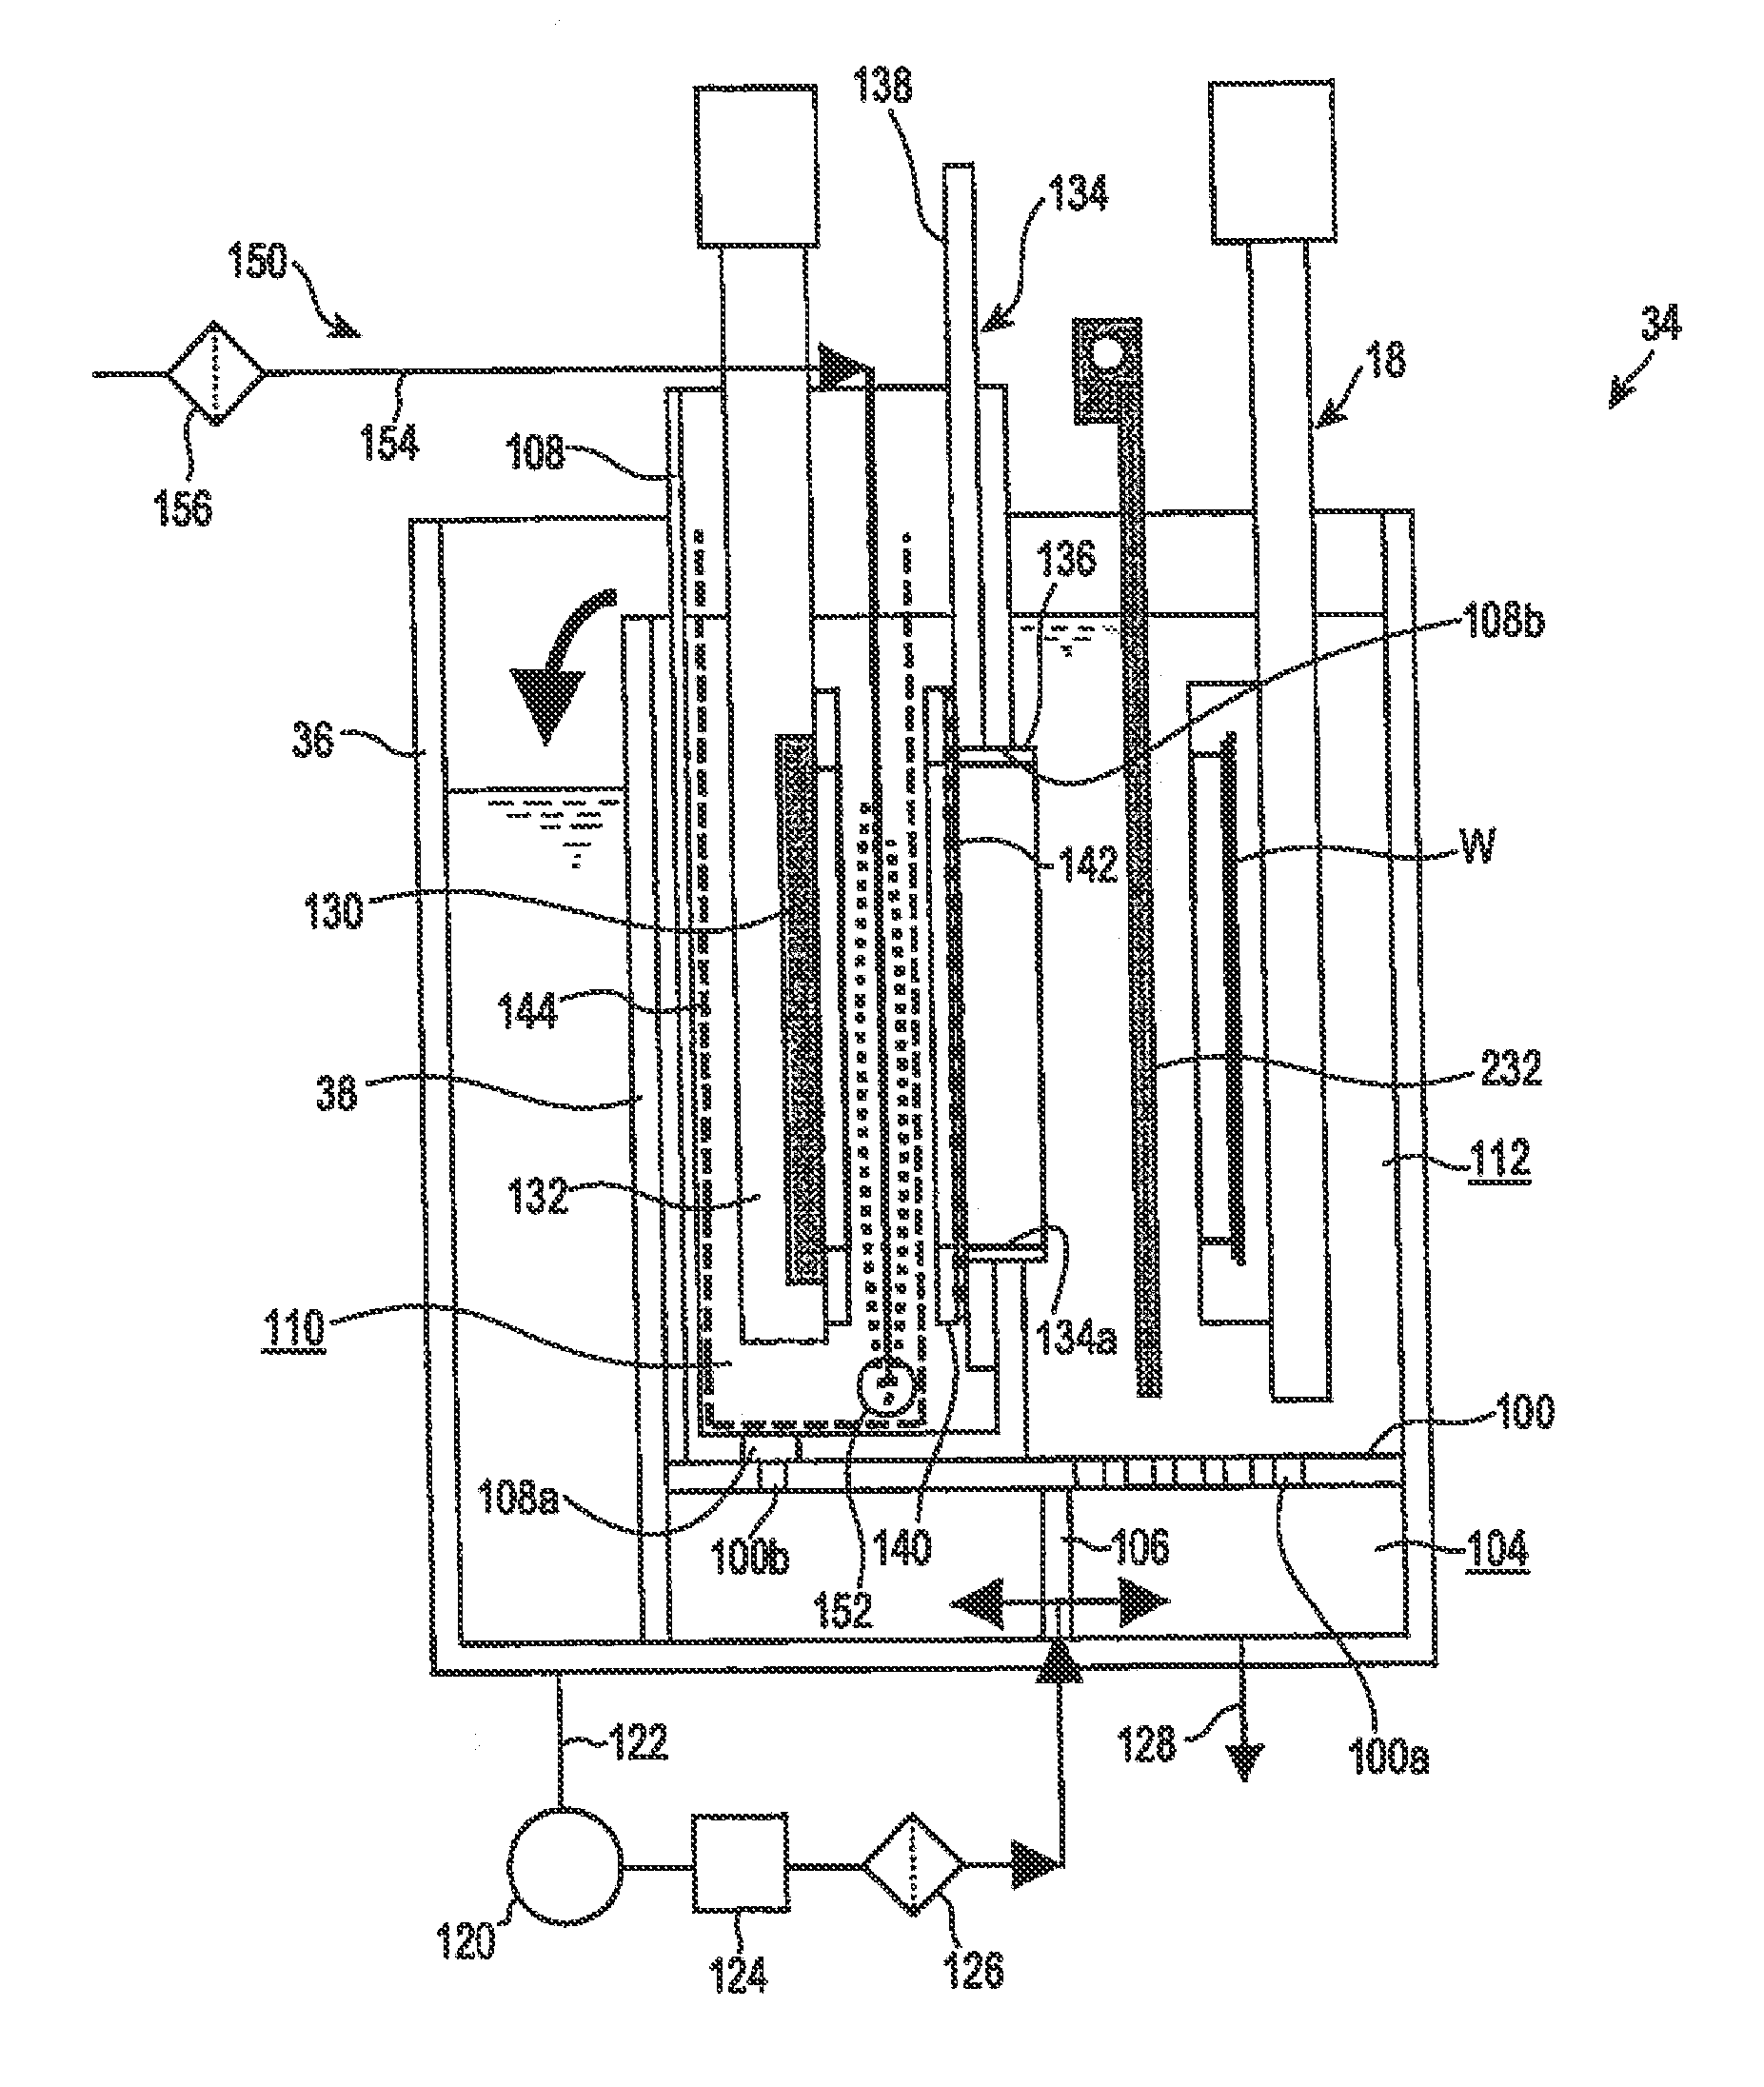 Copper electroplating apparatus